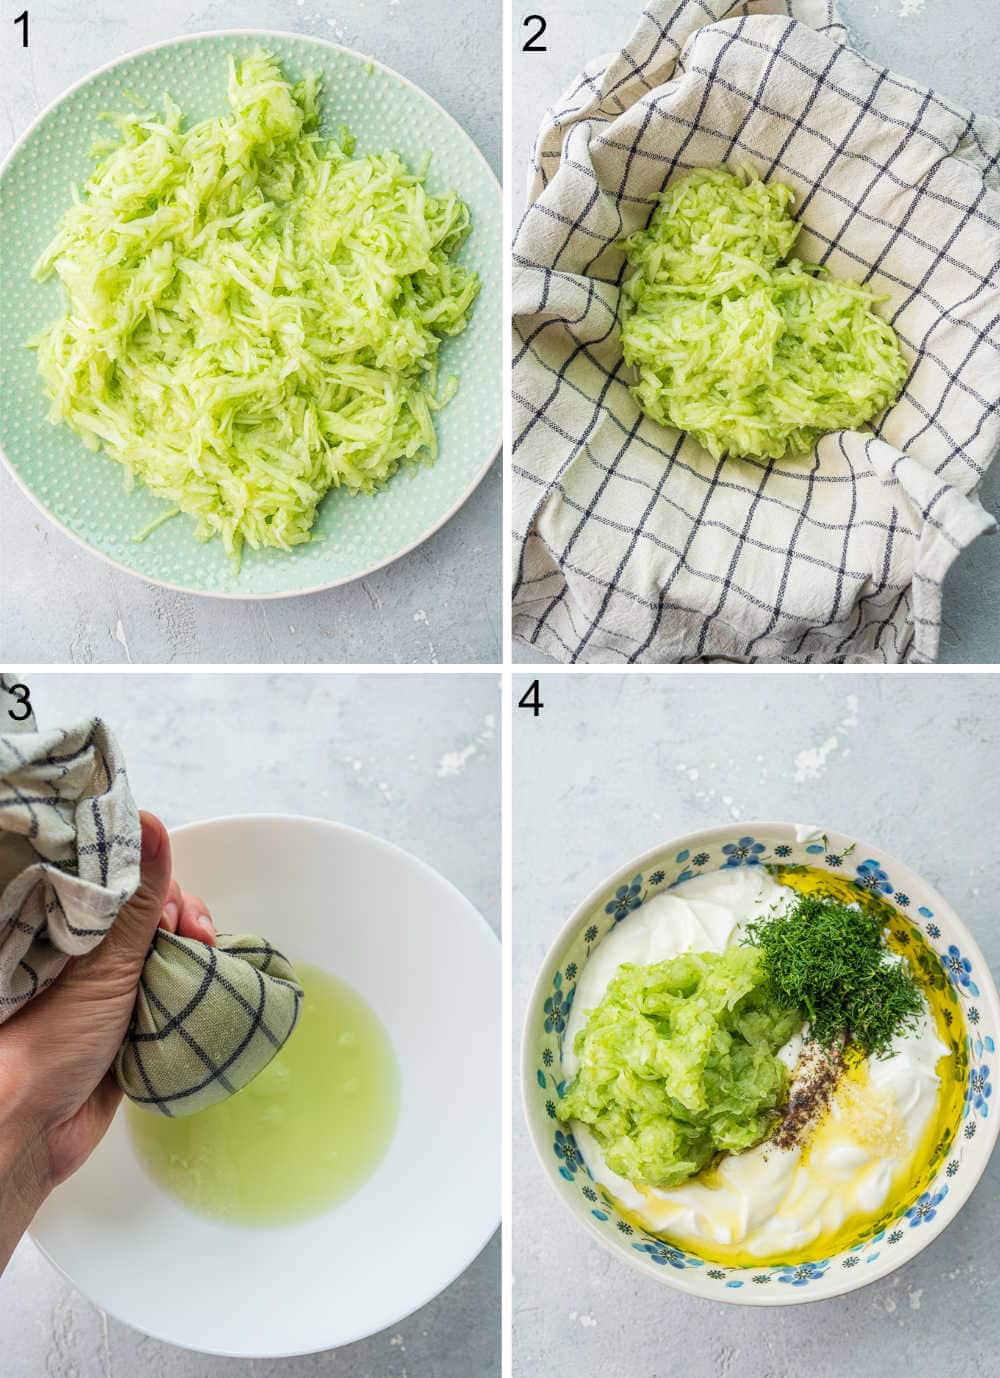 A collage of 4 photos showing how to make tzatziki dip step by step.